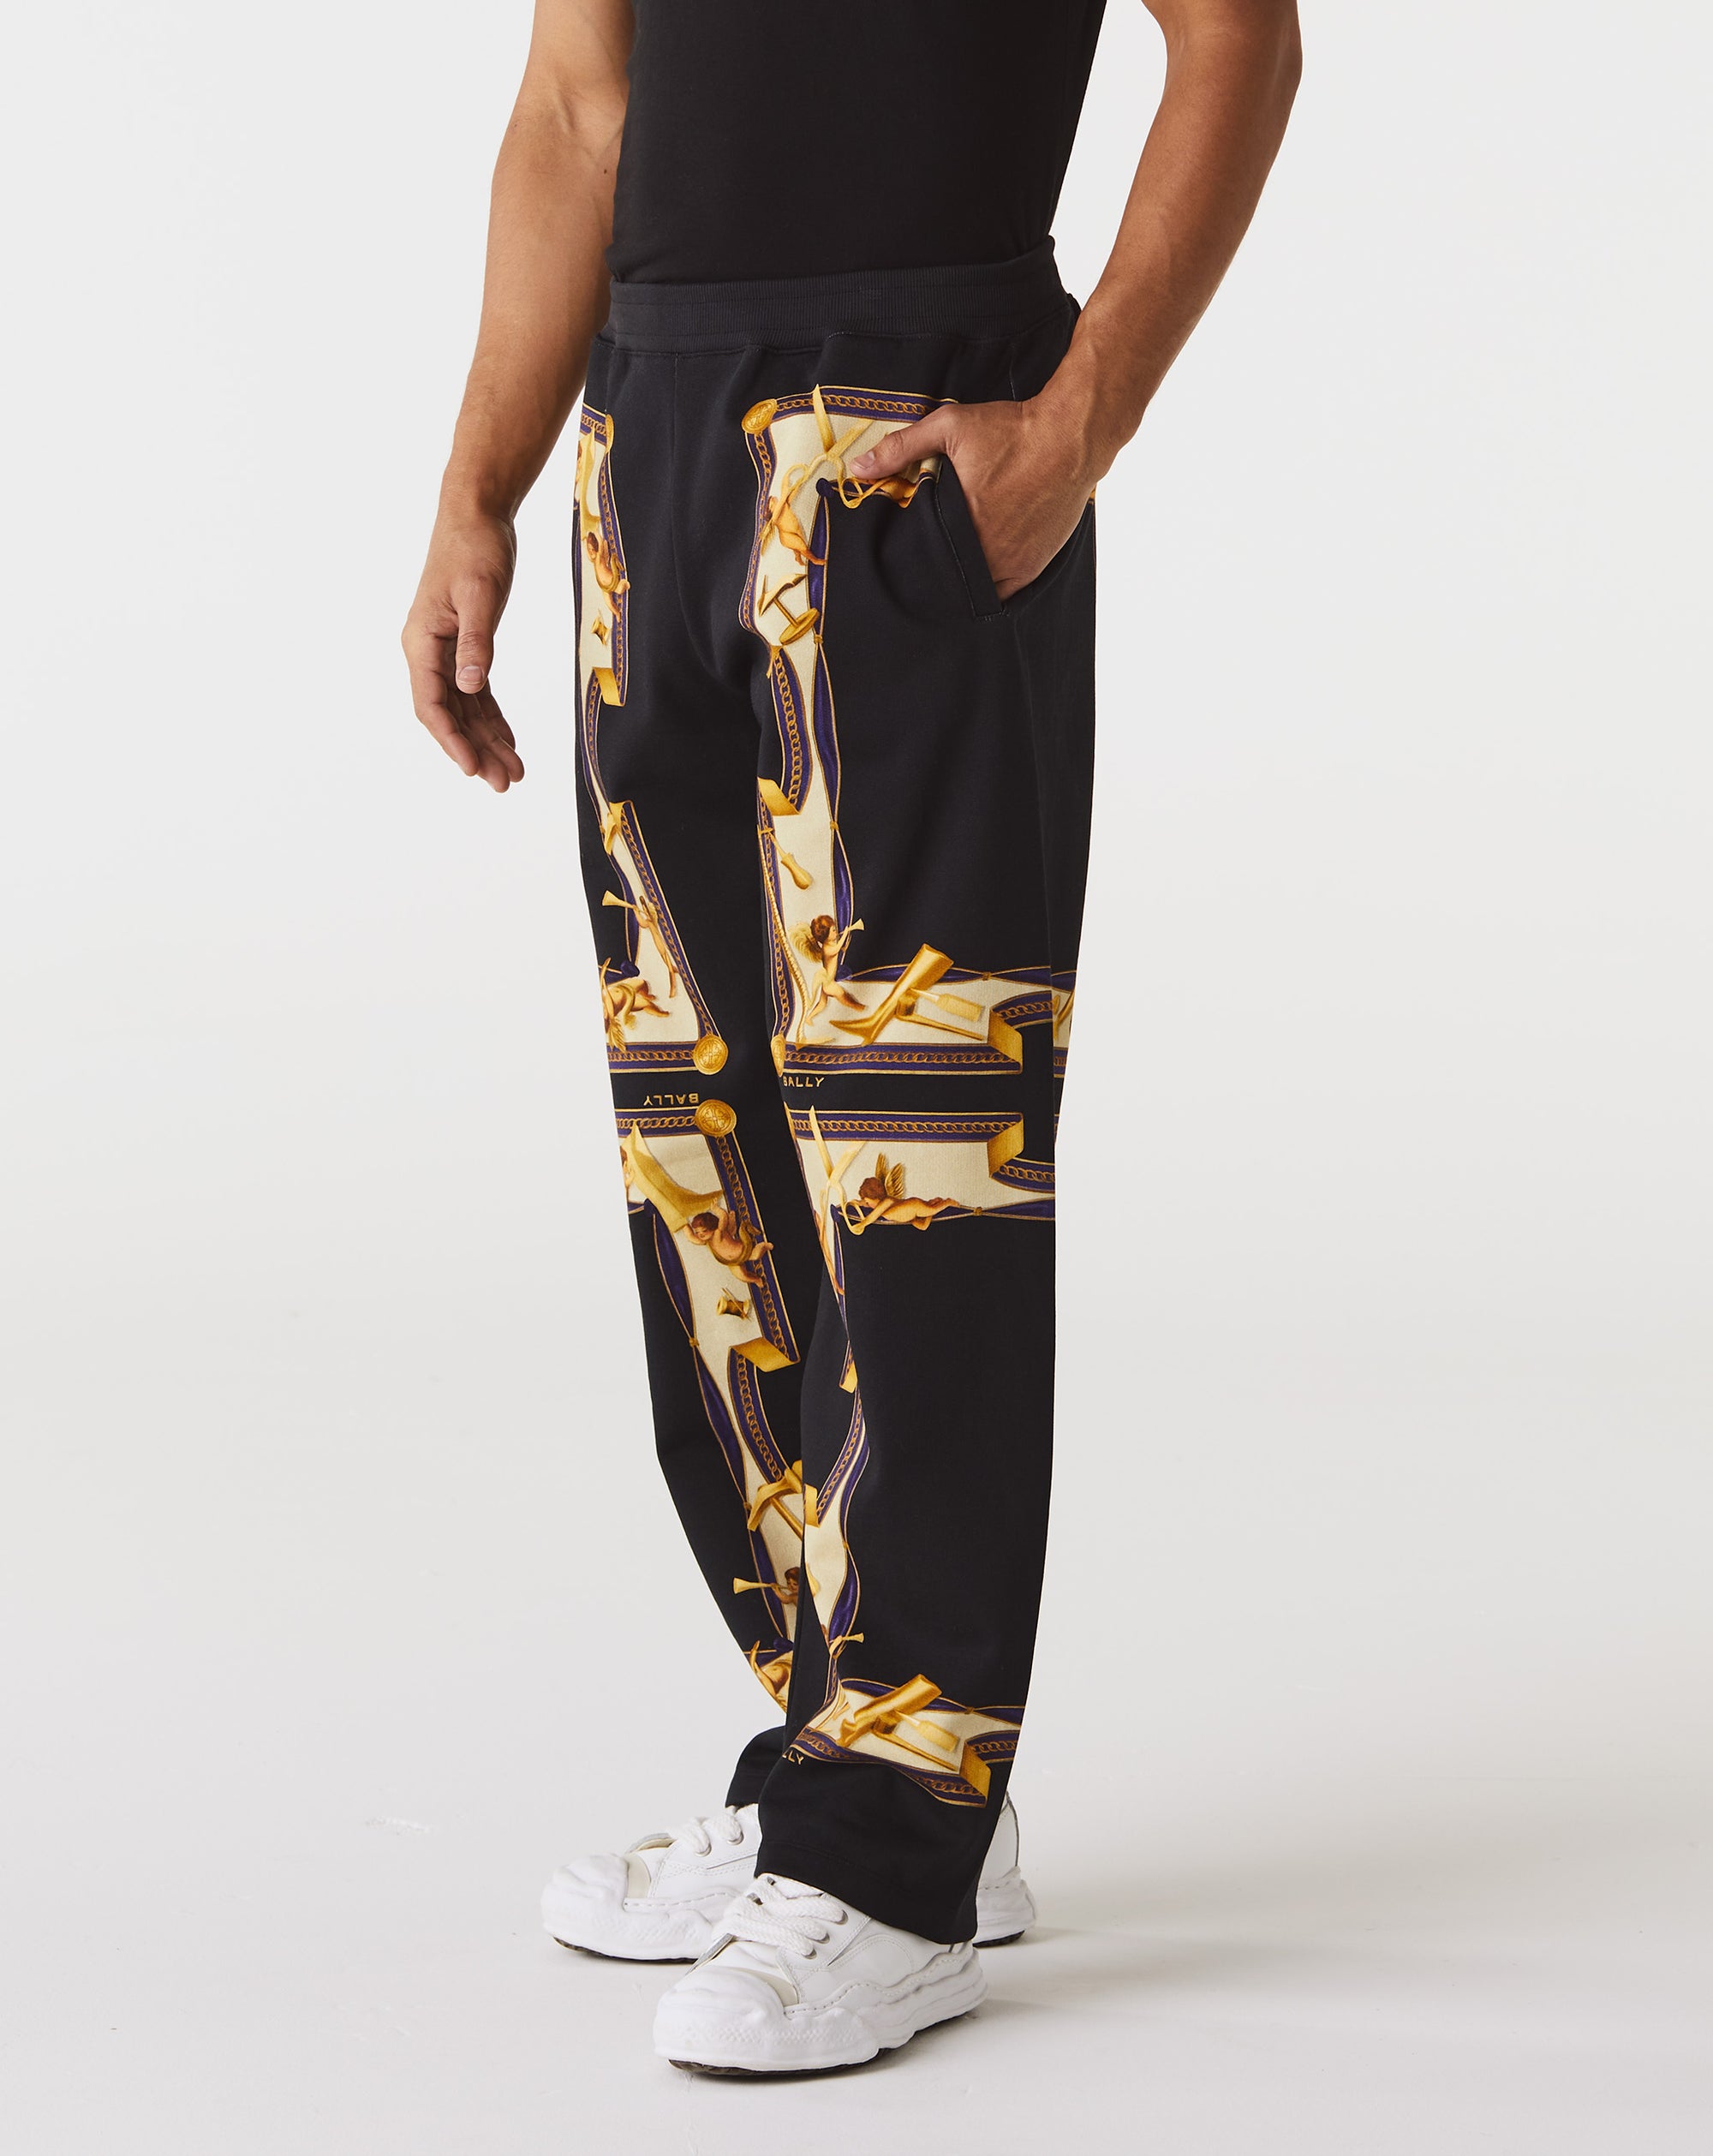 Bally Sweatpant - Rule of Next Apparel